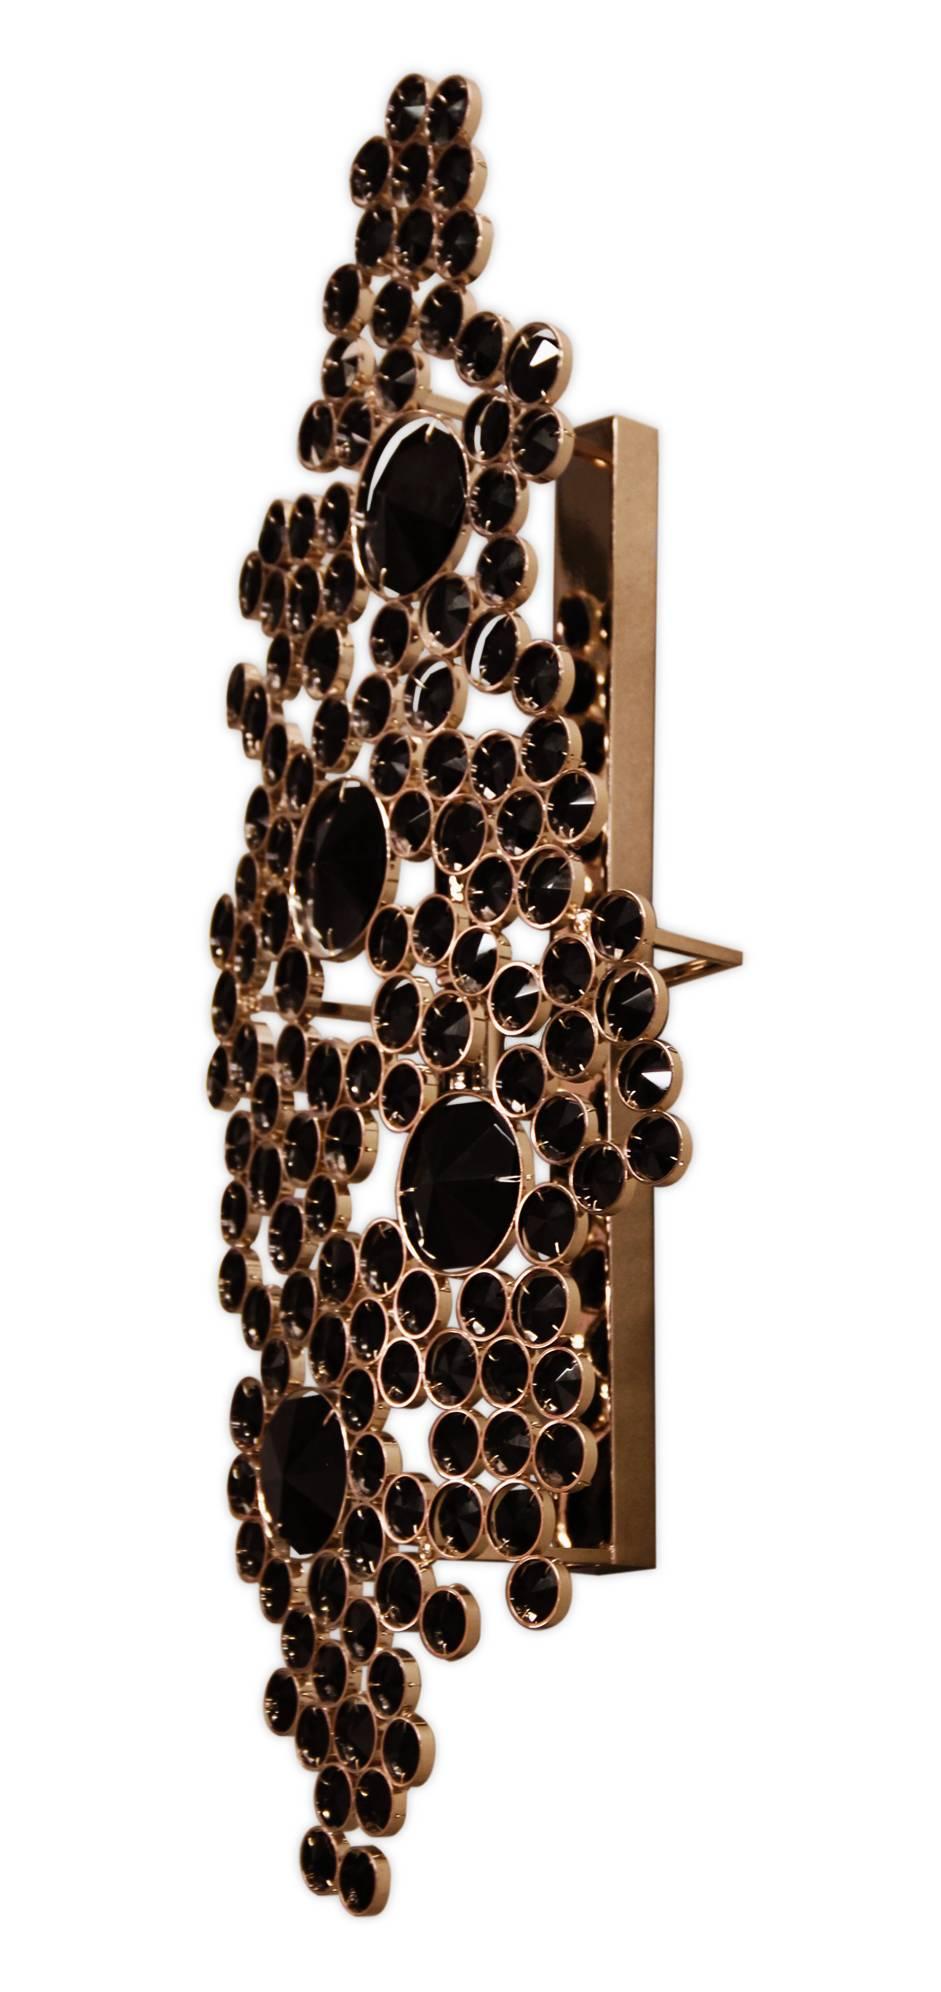 The elegant silhouette of this sconce takes its brilliance from the skillful application of the crystals. The eternal circles are individually wrapped in polished brass and placed with astonishing attention to detail. The end result is an